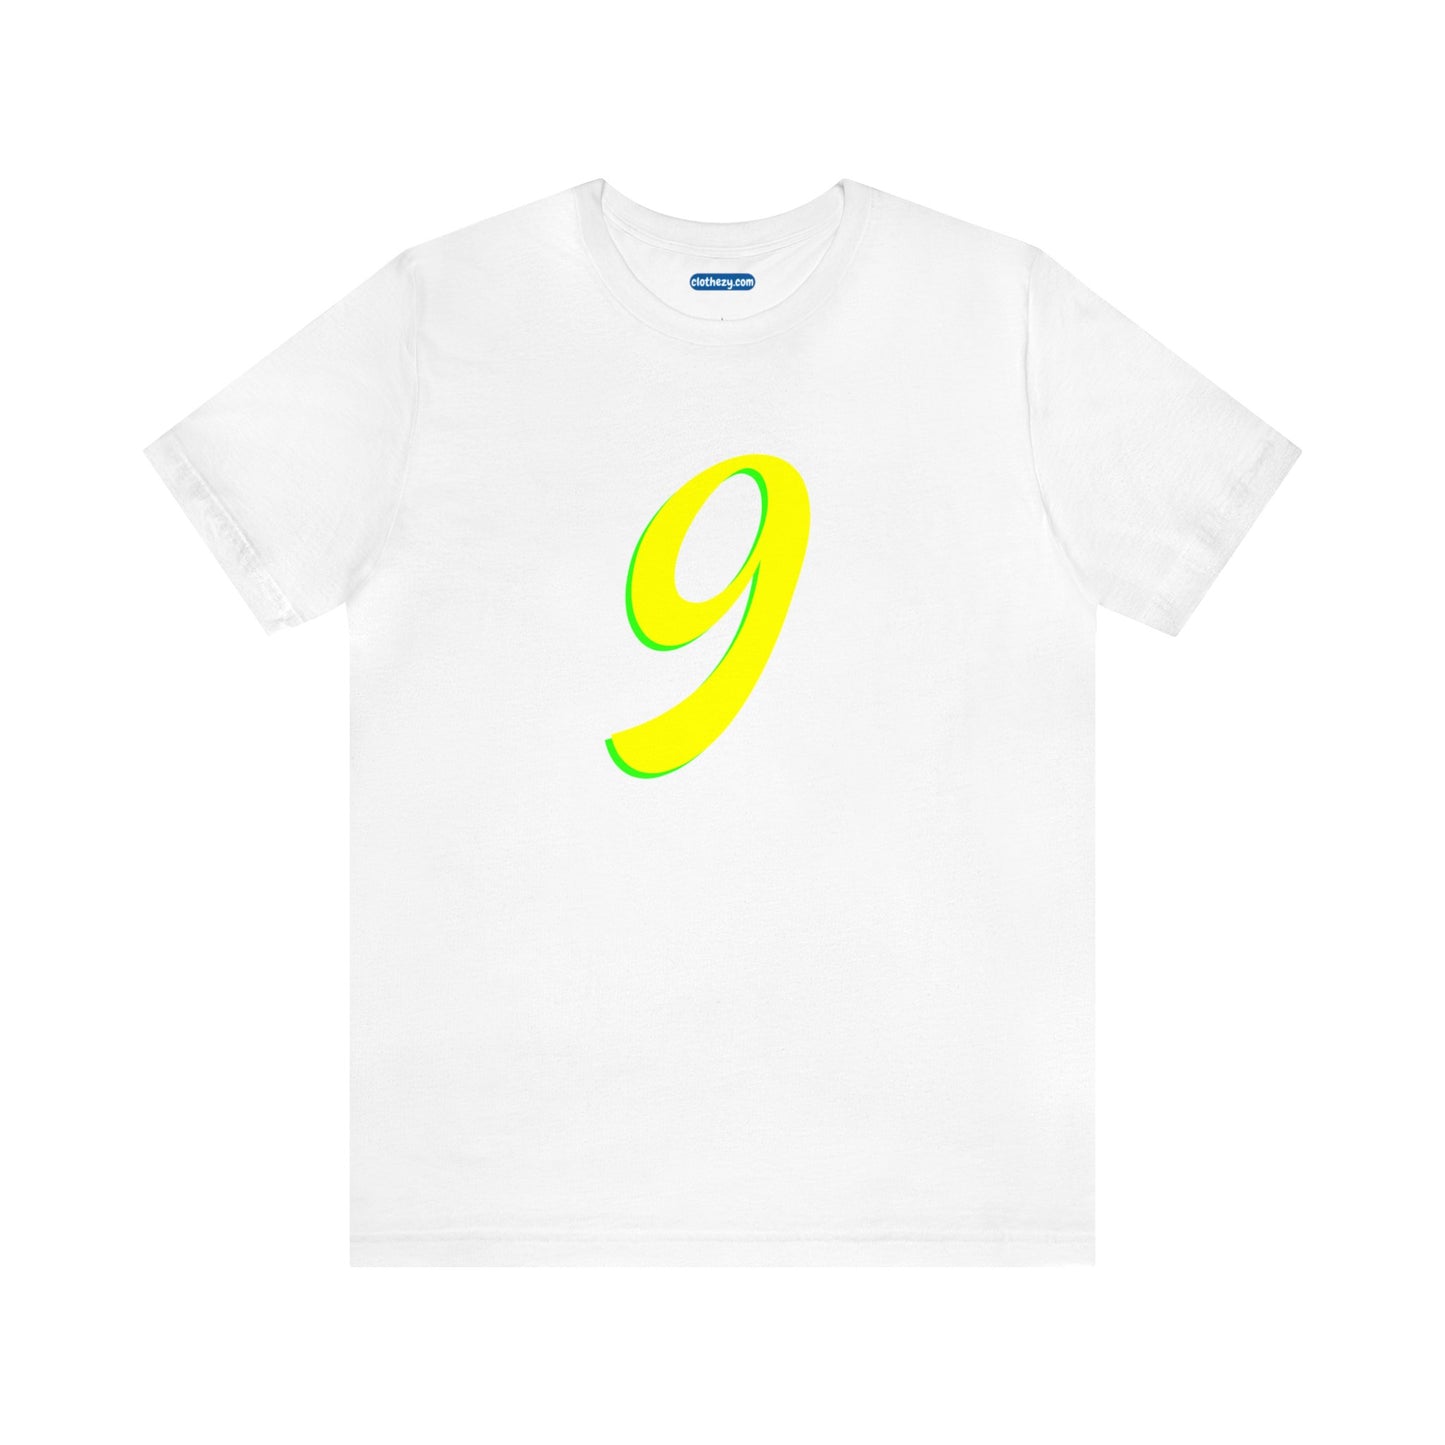 Number 9 Design - Soft Cotton Tee for birthdays and celebrations, Gift for friends and family, Multiple Options by clothezy.com in White Size Small - Buy Now